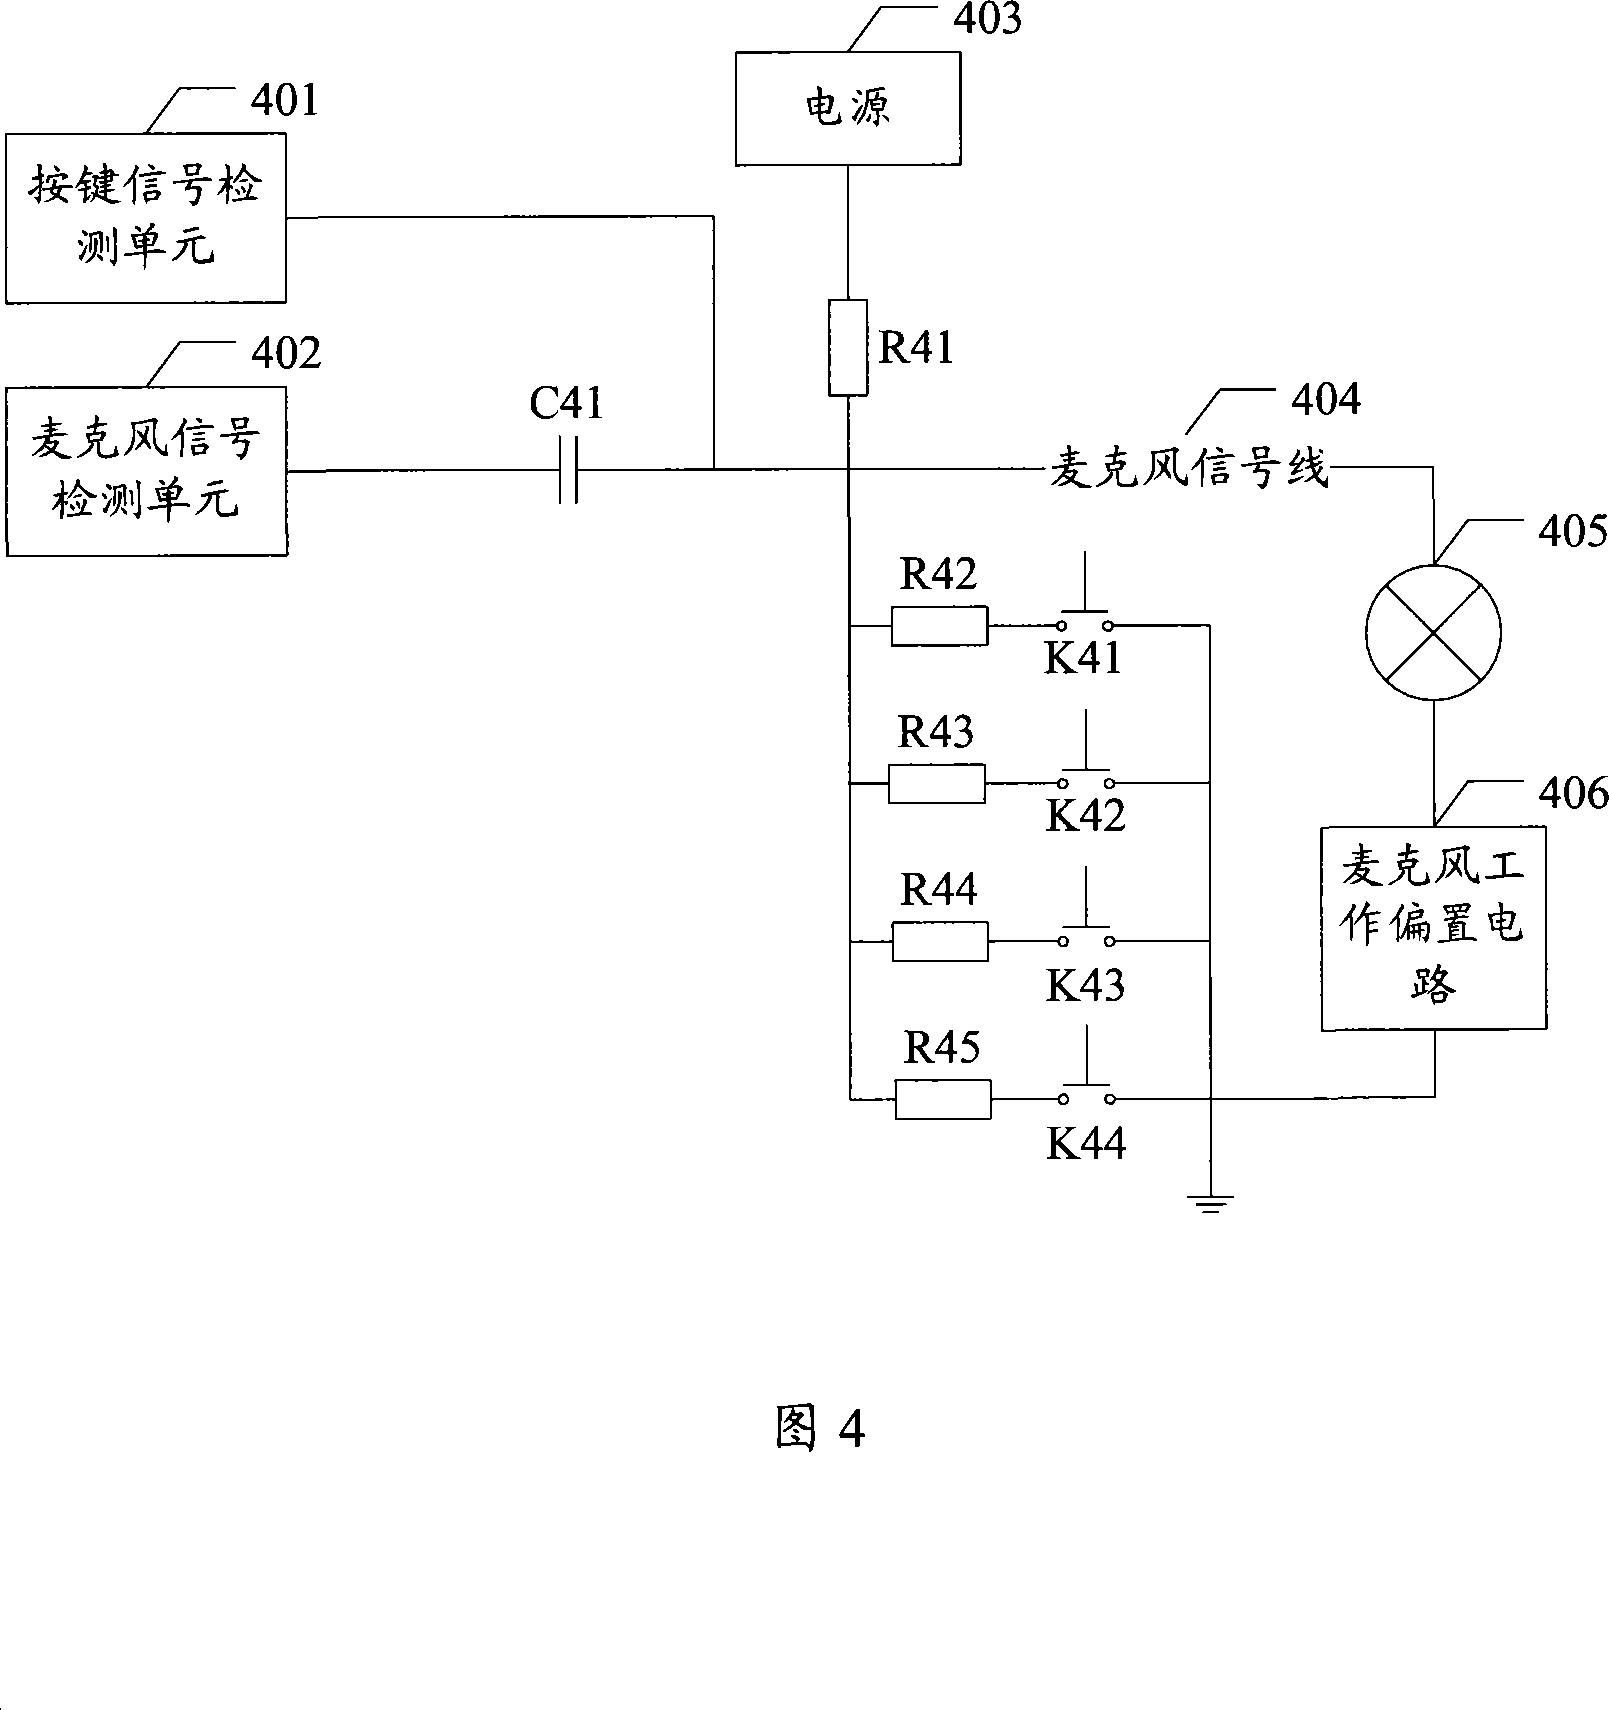 Method and audio device for transferring key information